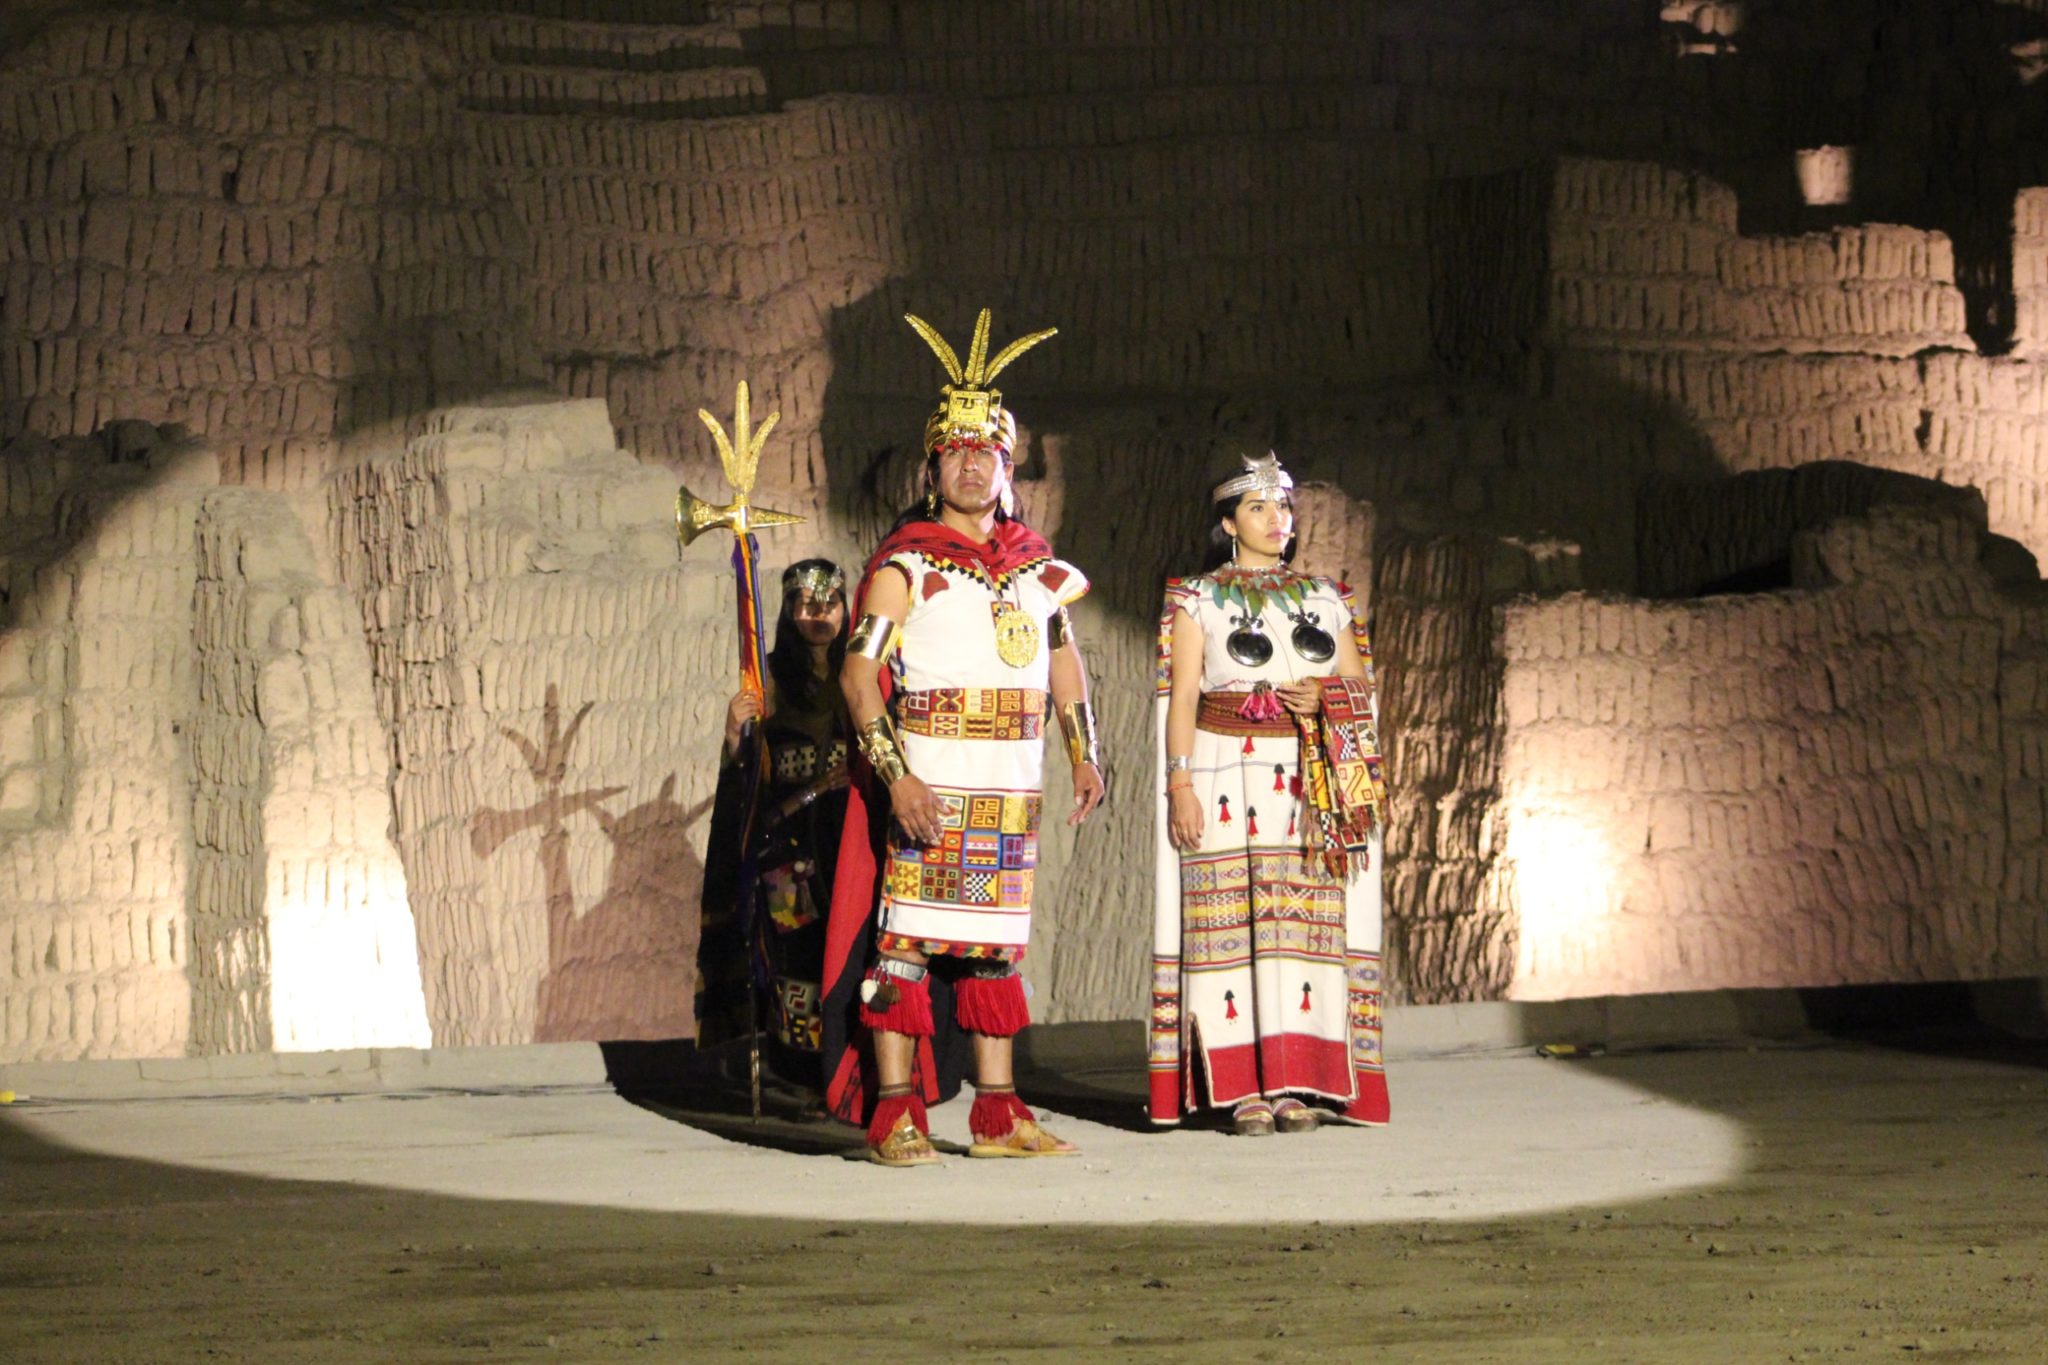 The festivals of Cusco and the Inti Raymi were presented in a ceremony held at the Huaca Pucllana in the city of Lima